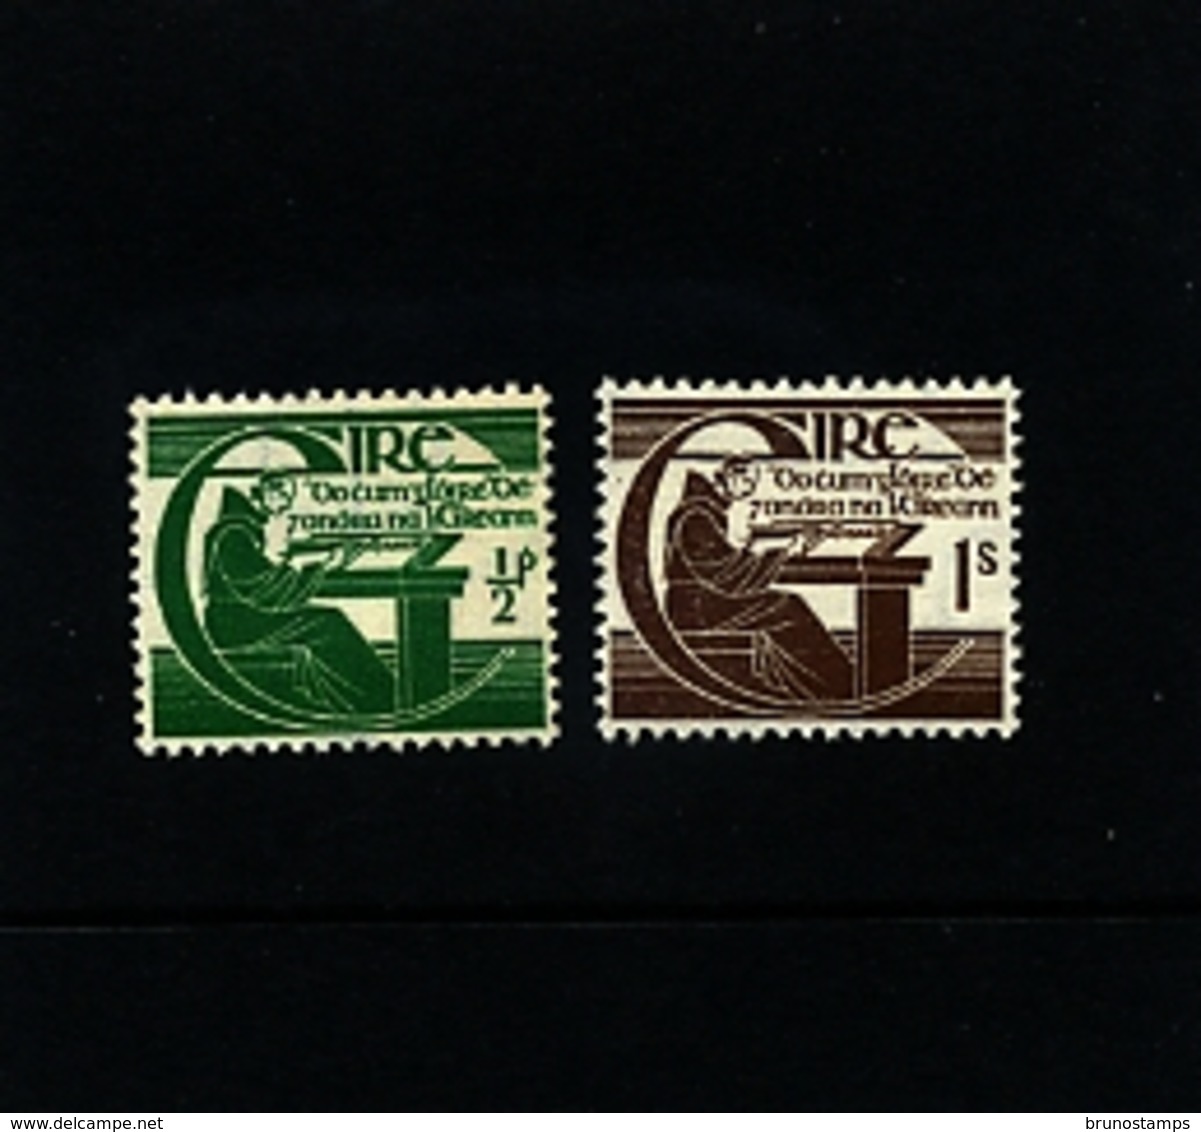 IRELAND/EIRE - 1944  MICHAEL O'CLERY  SET  MINT - Unused Stamps